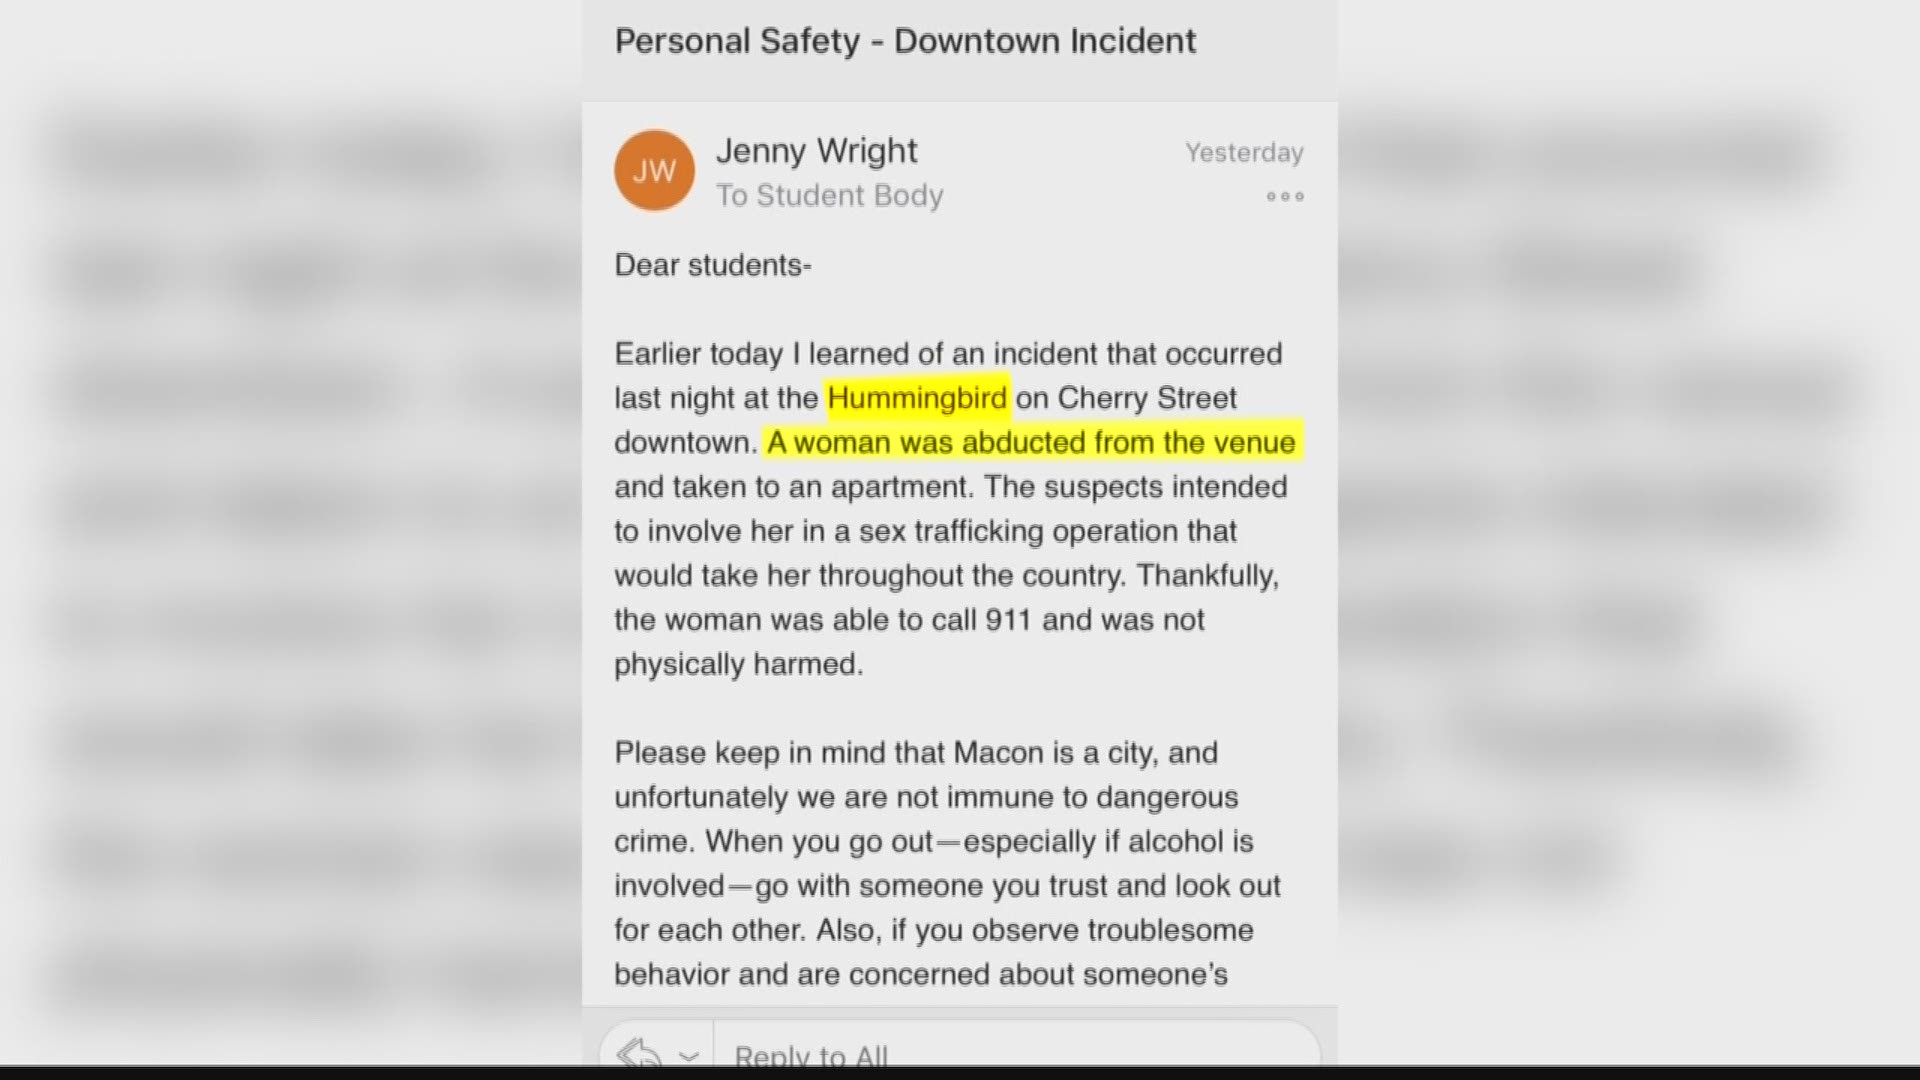 Mercer Law School's Assistant Dean of Students sent out an email to students saying a woman was abducted at the Hummingbird in downtown Macon. Did this alleged abduction actually happen?